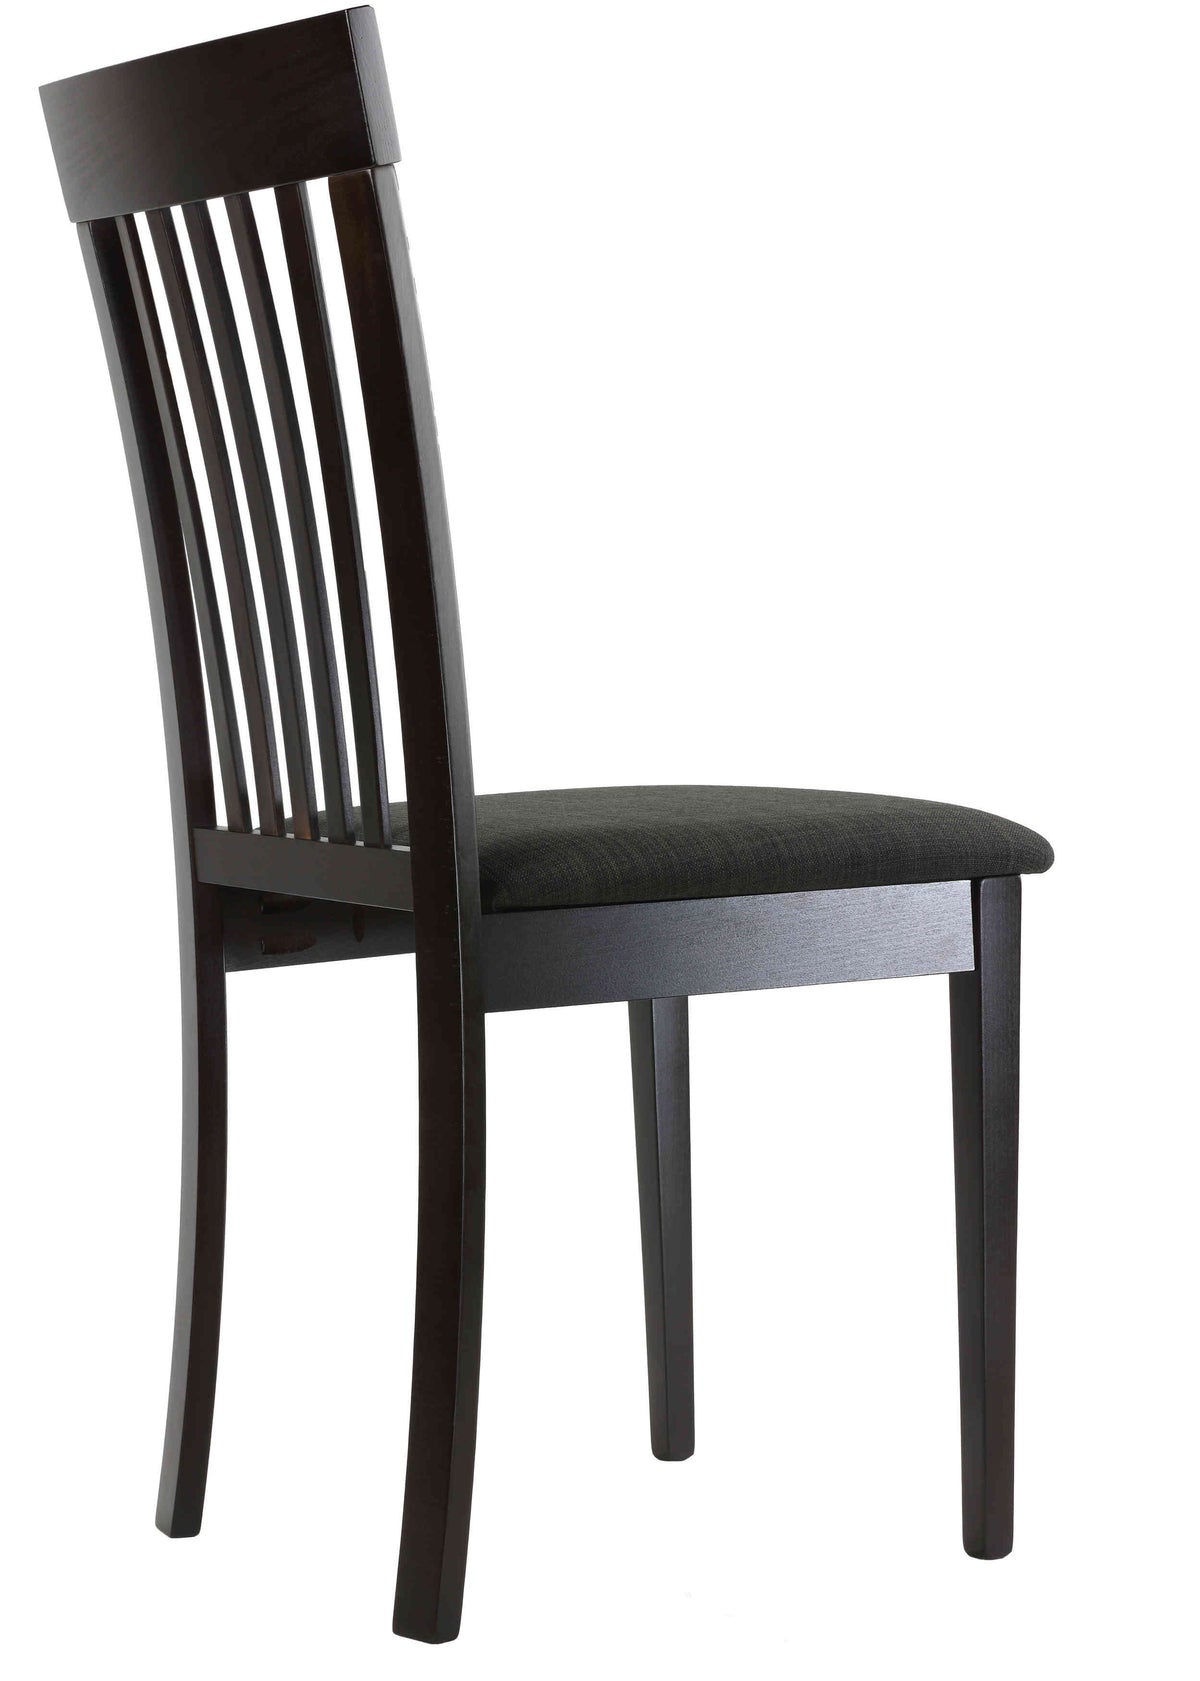 Cortesi Home Linnea Dining Chair in Charcoal Fabric, Cappuccino Finish (Set of 2)